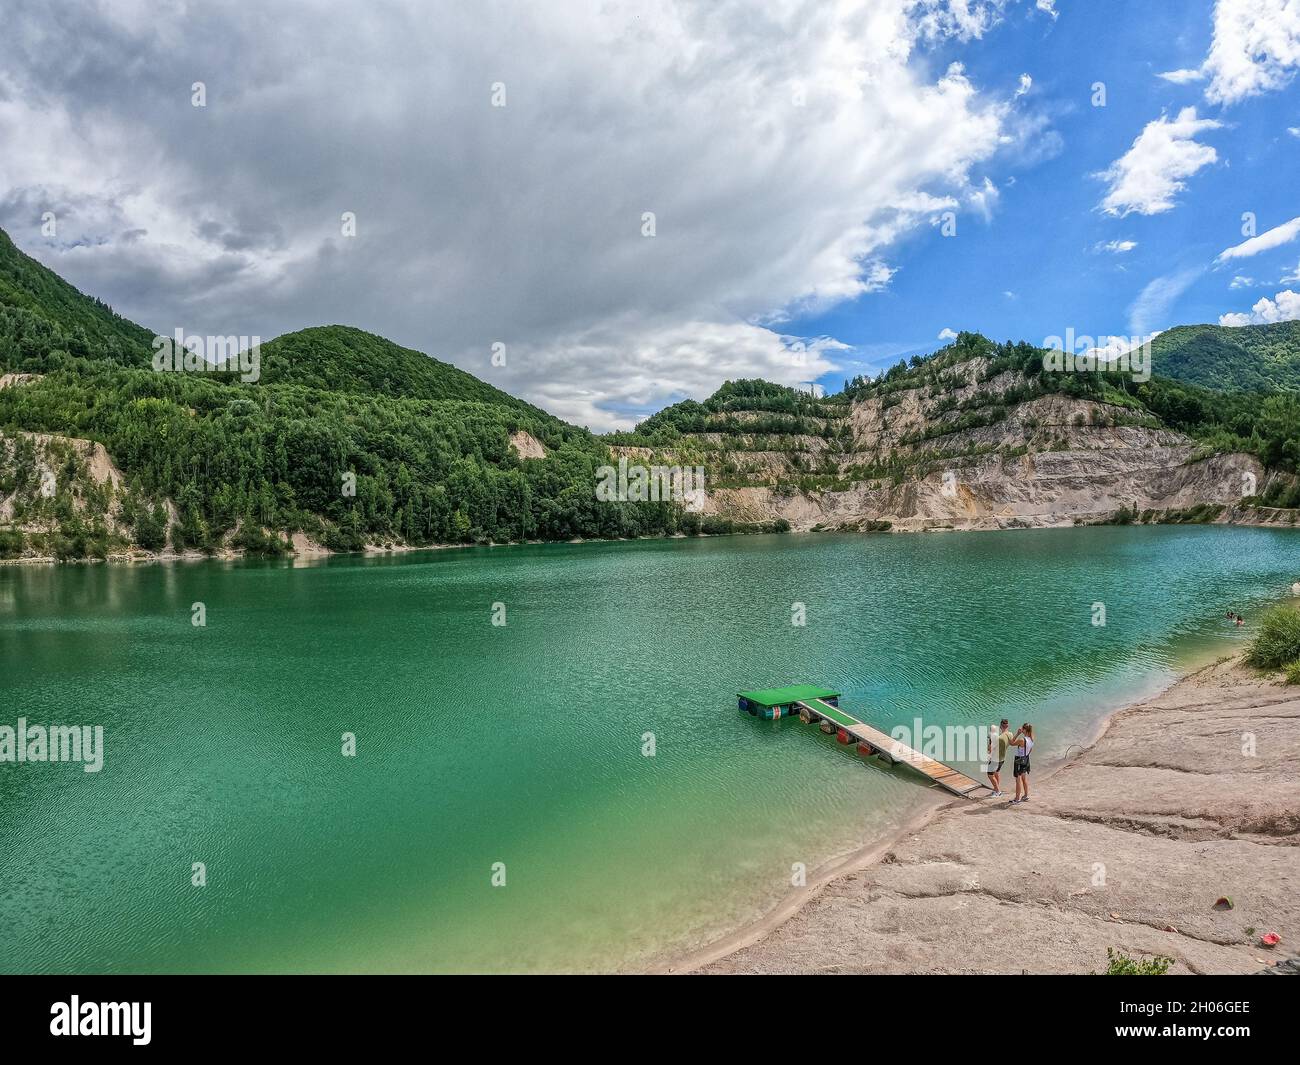 A view of a lake in the village of Sutovo in Slovakia Stock Photo